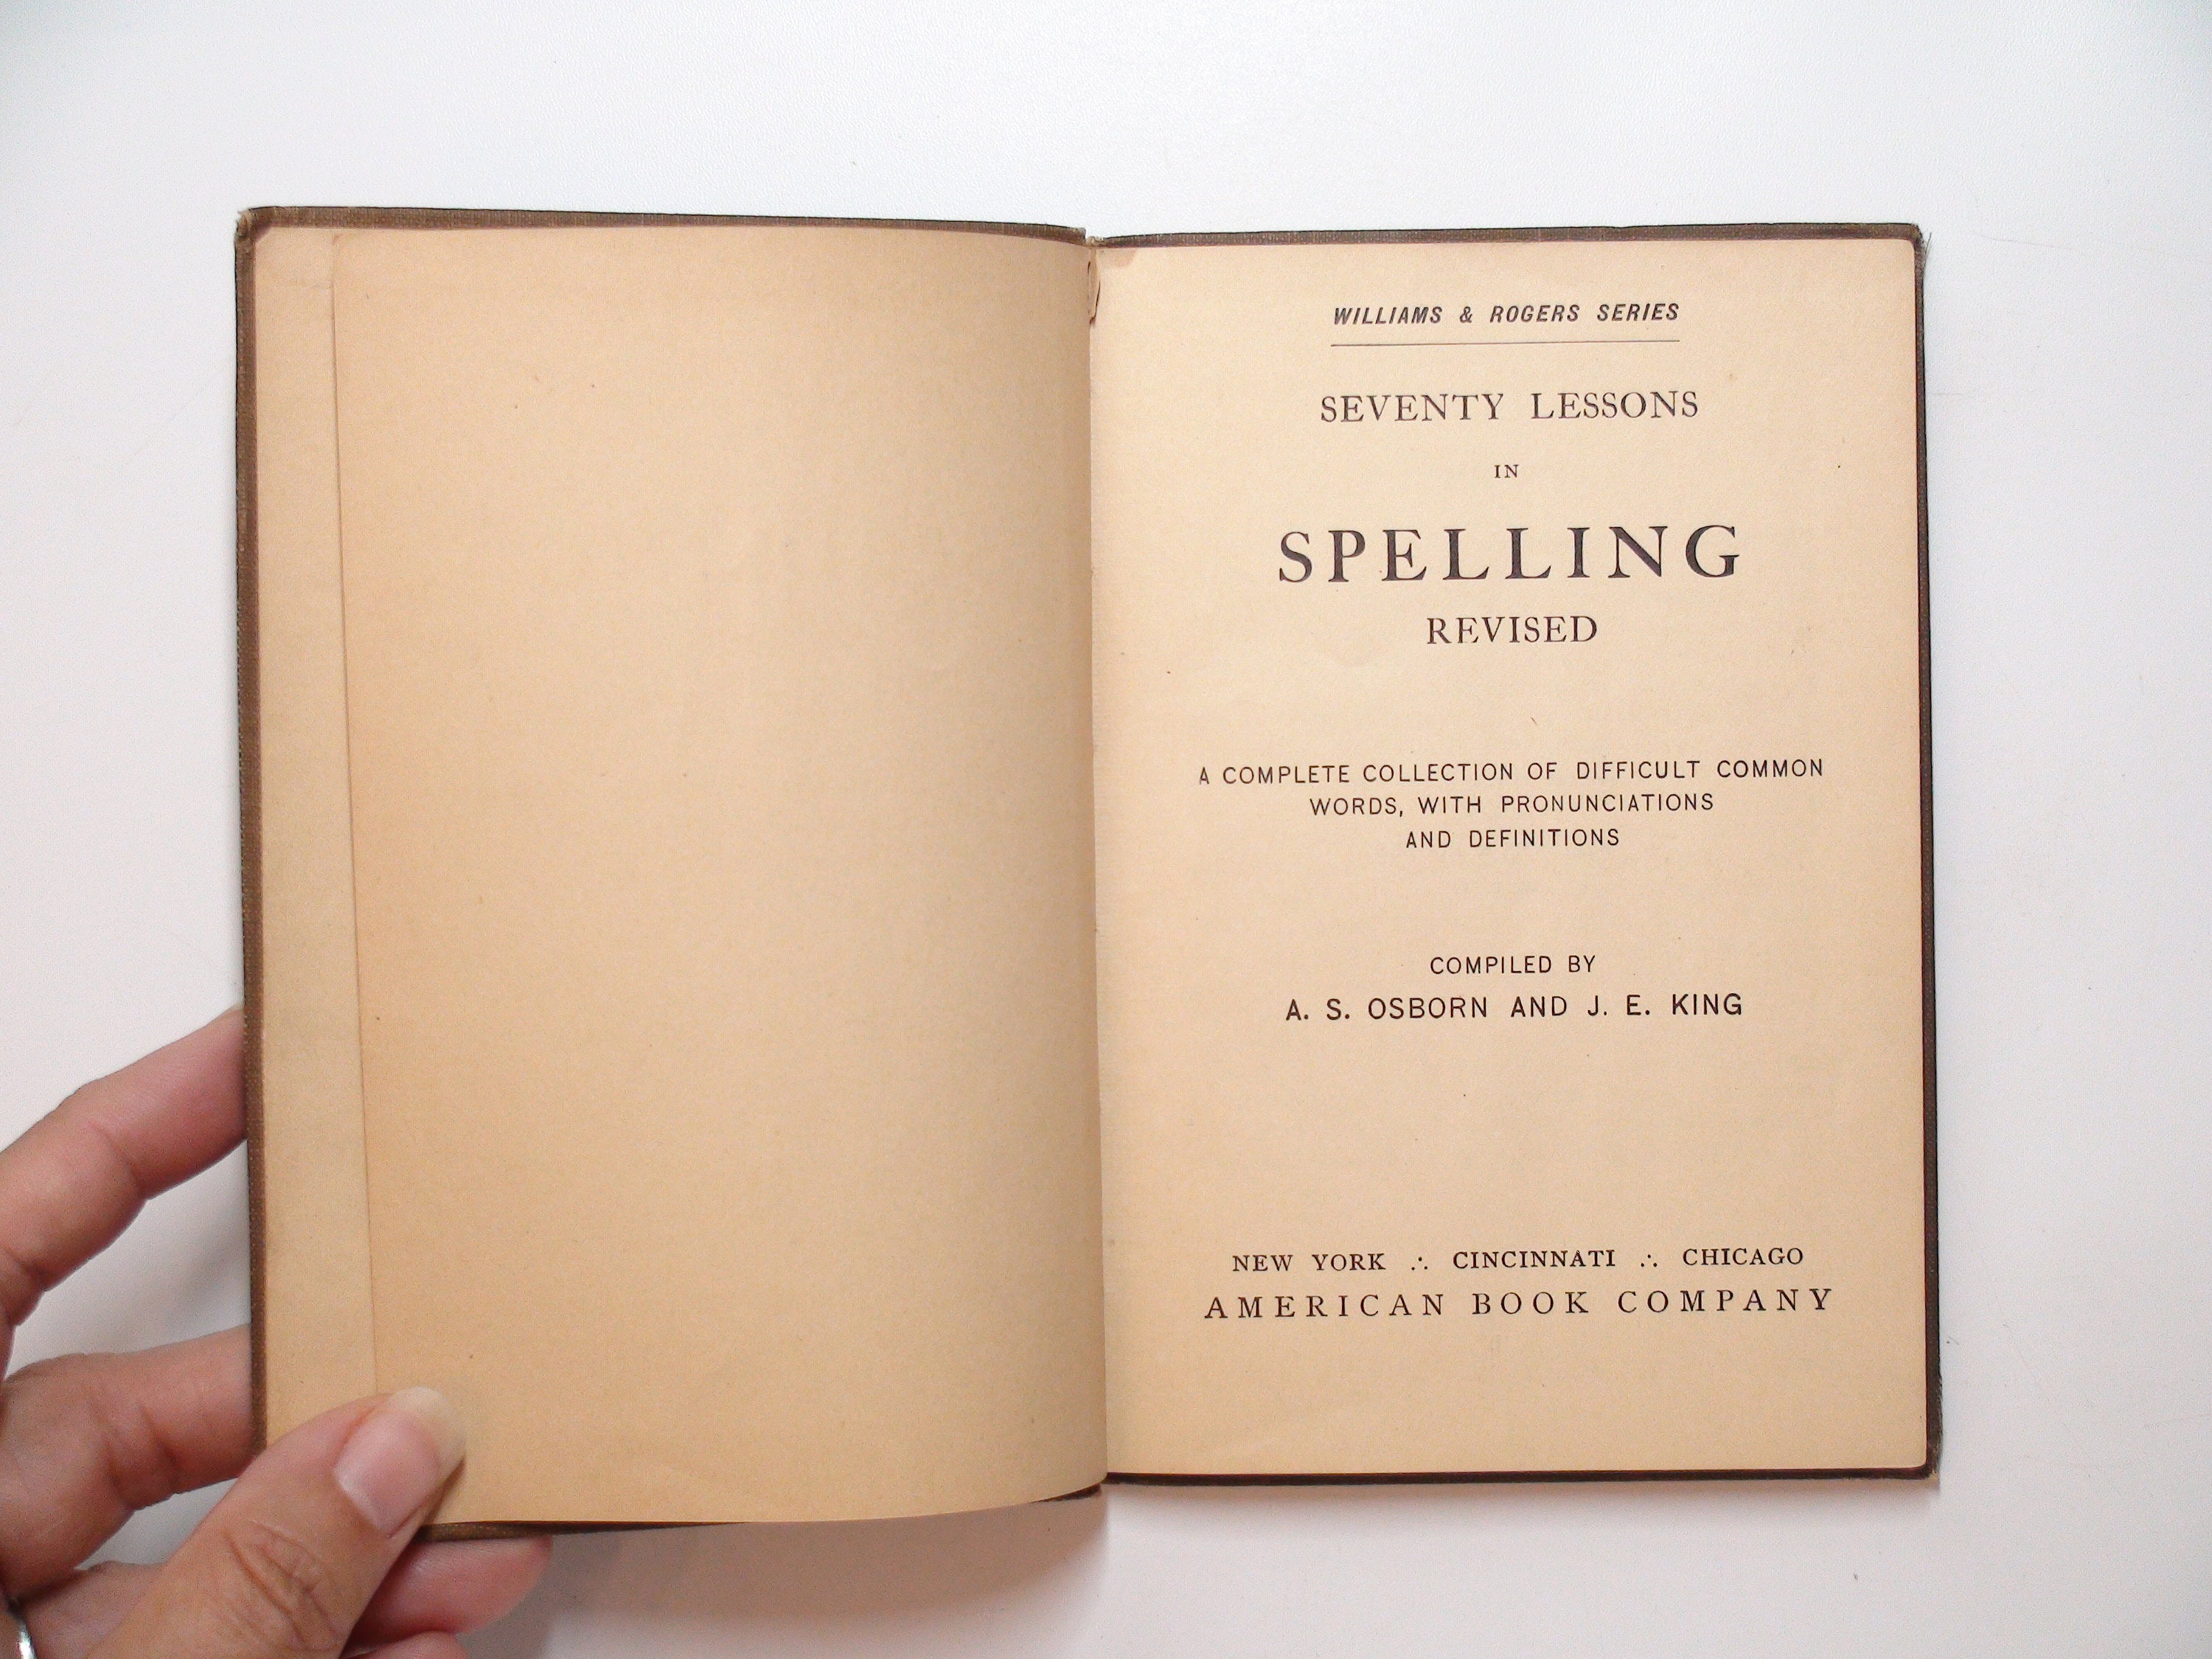 Williams & Rogers Series, Seventy Lessons in Spelling, Revised, 1906